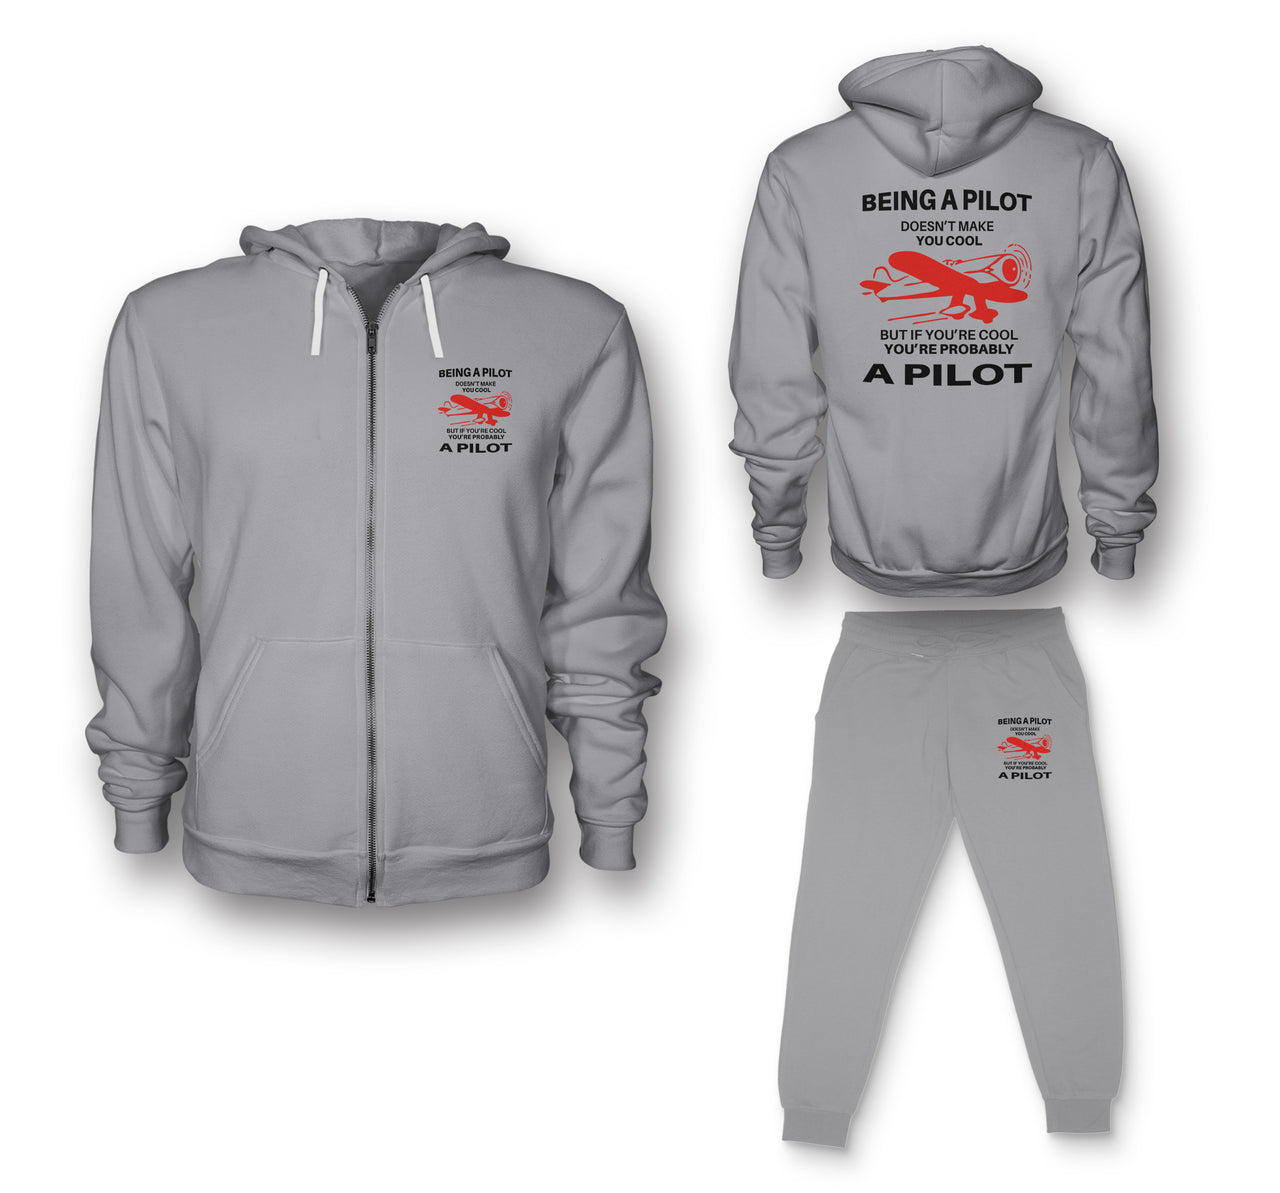 If You're Cool You're Probably a Pilot Designed Zipped Hoodies & Sweatpants Set